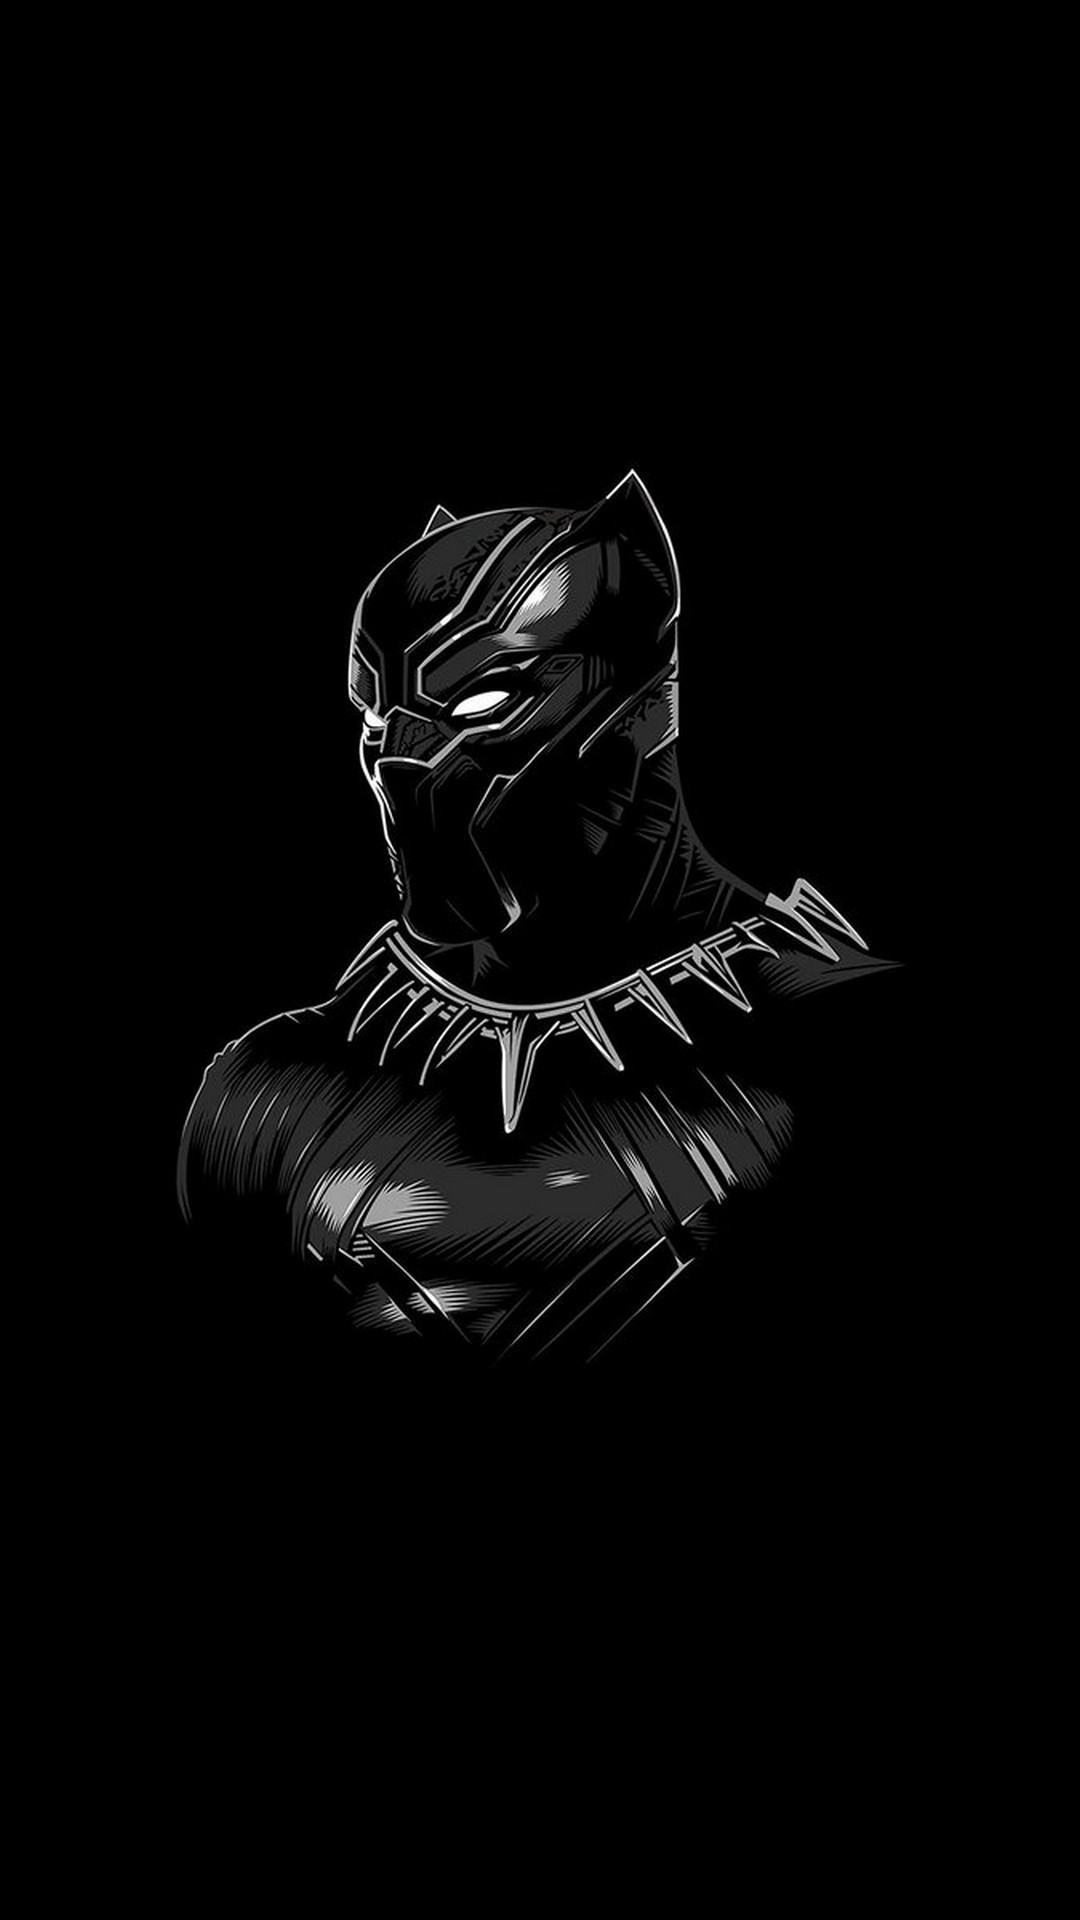 Black Panther iPhone Wallpaper With high-resolution 1080X1920 pixel. You can use this wallpaper for your iPhone 5, 6, 7, 8, X, XS, XR backgrounds, Mobile Screensaver, or iPad Lock Screen